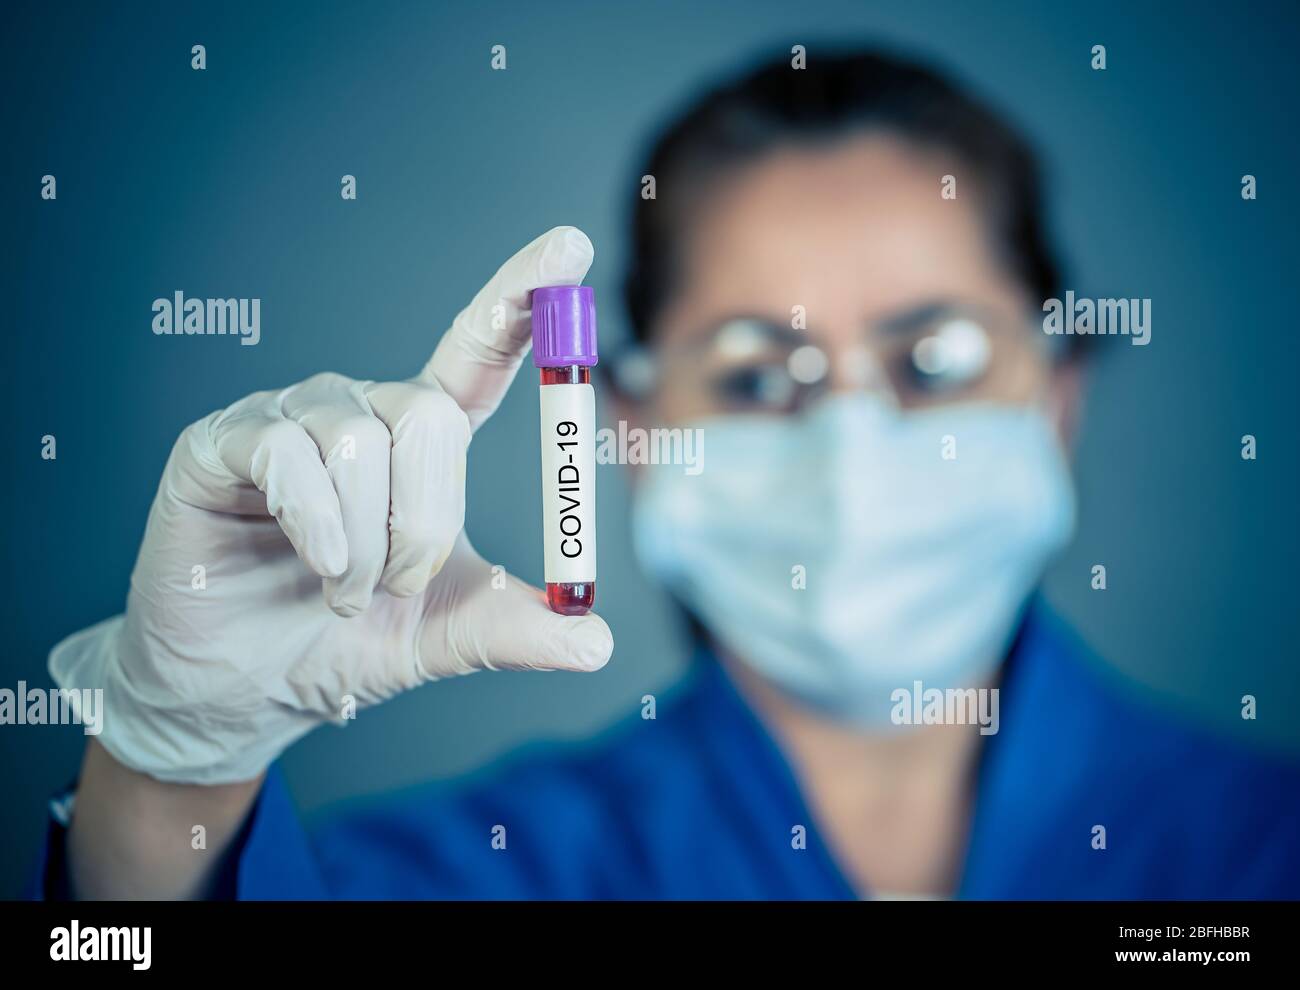 COVID-19. Doctor or lab technician scientist in Personal Protective Equipment holding vial of blood sample of infected patient at hospital. Coronaviru Stock Photo